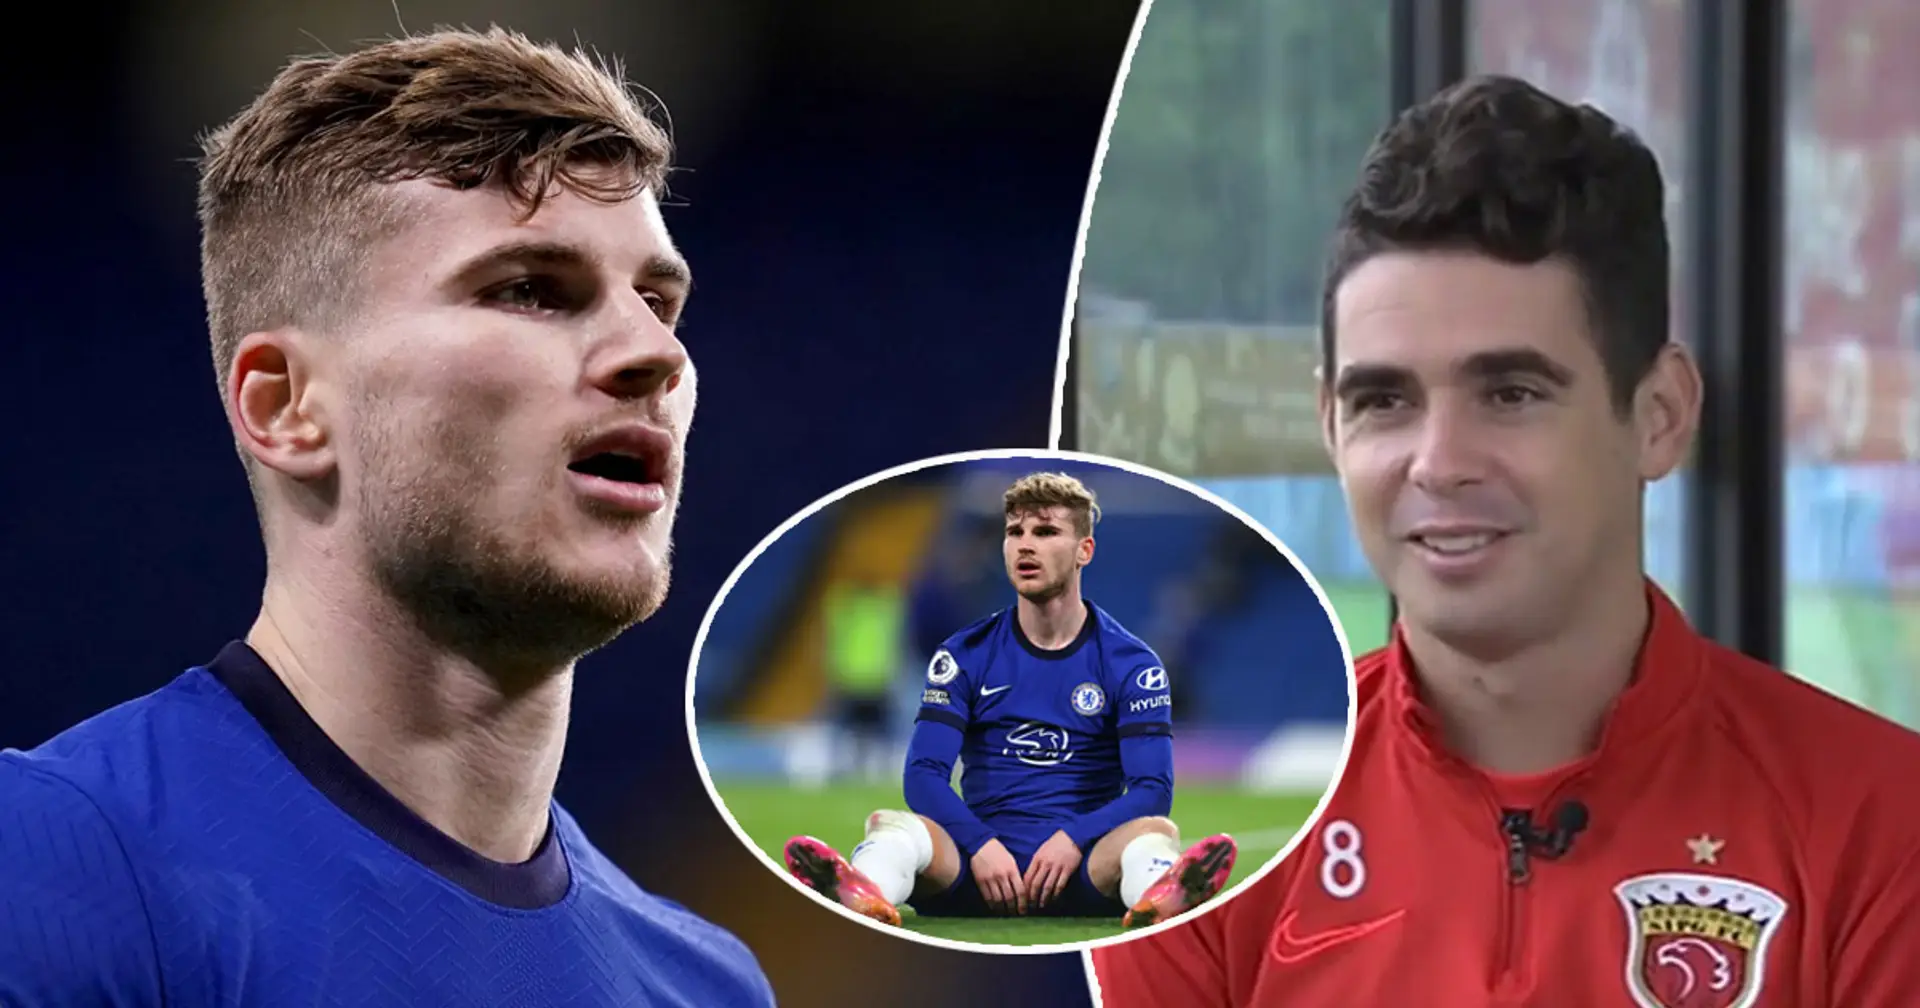 Oscar names simple reason why he wants Werner to score Champions League final winner